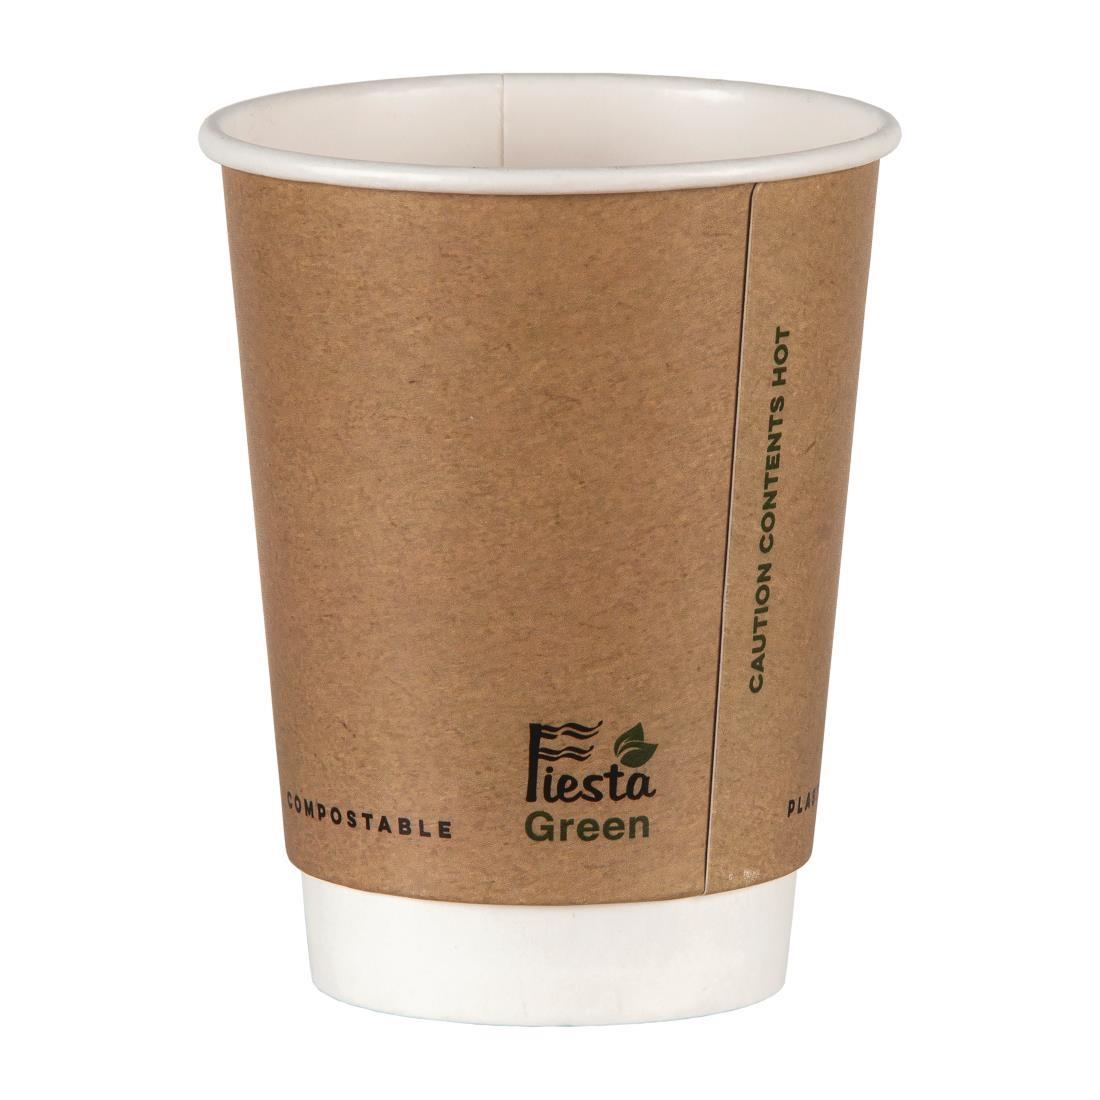 Fiesta Green Plastic-Free Compostable Hot Cups Double Wall 340ml / 12oz x 500 - FB953  - 2